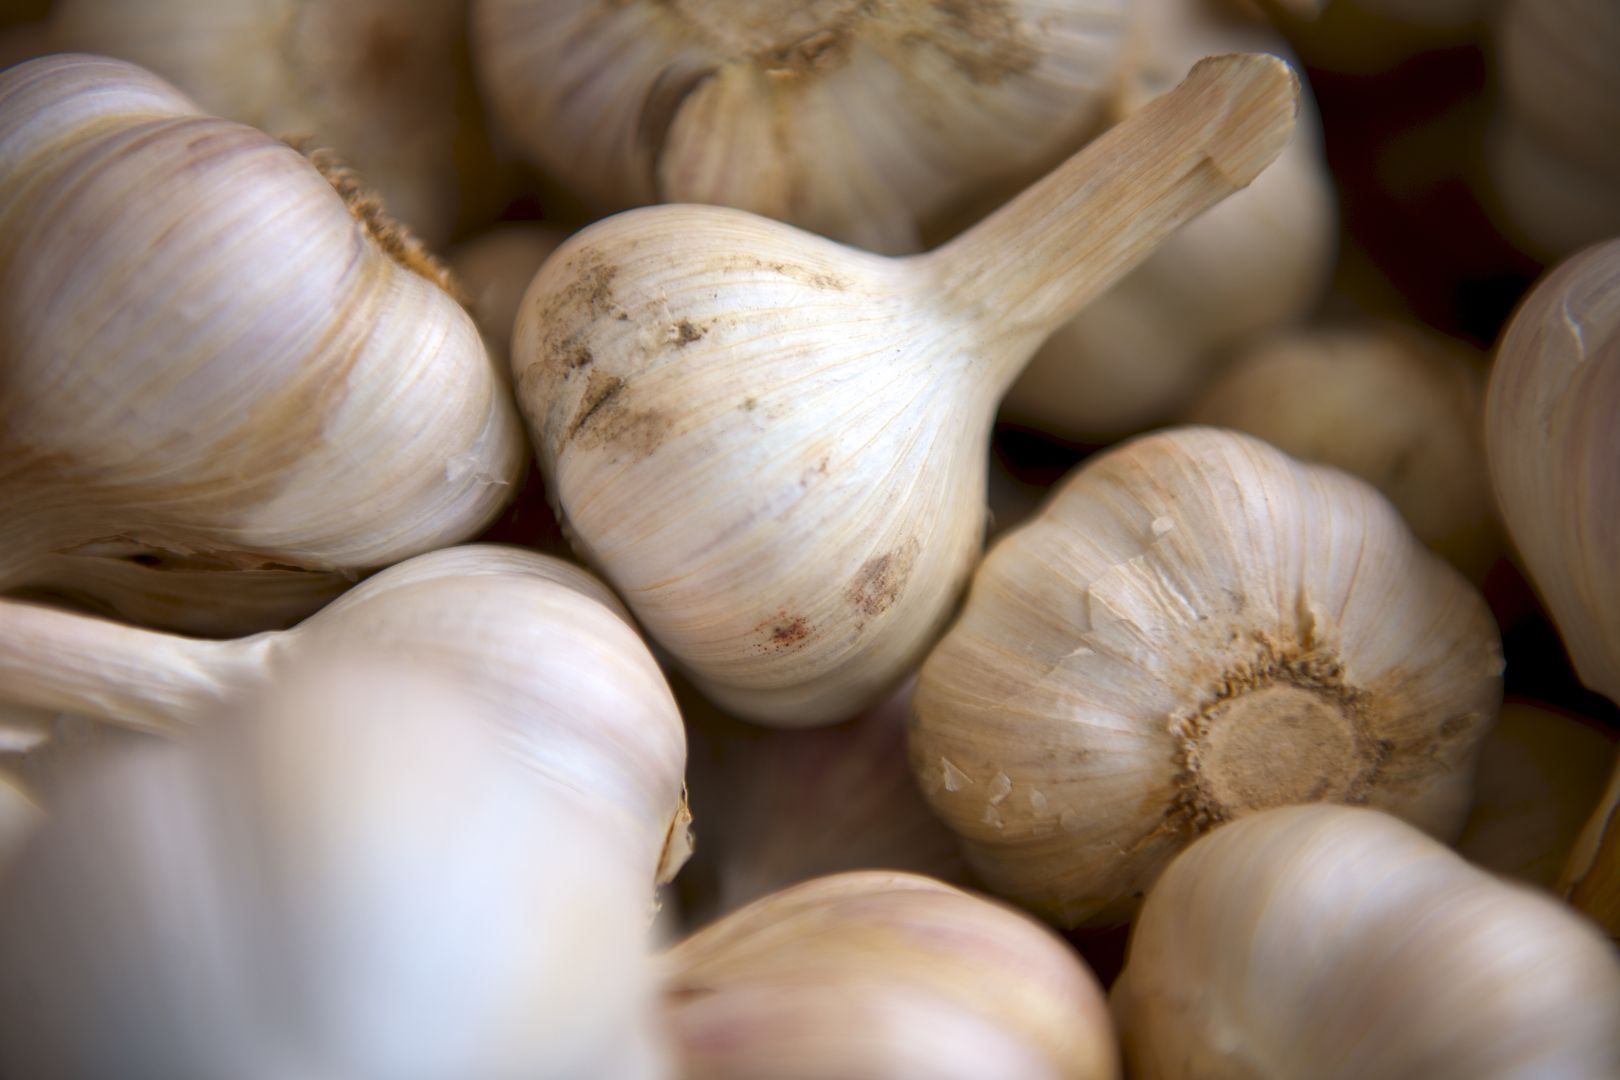 Immunity-boosting foods: Garlic is one of the best cold preventatives available, especially if you eat it raw!